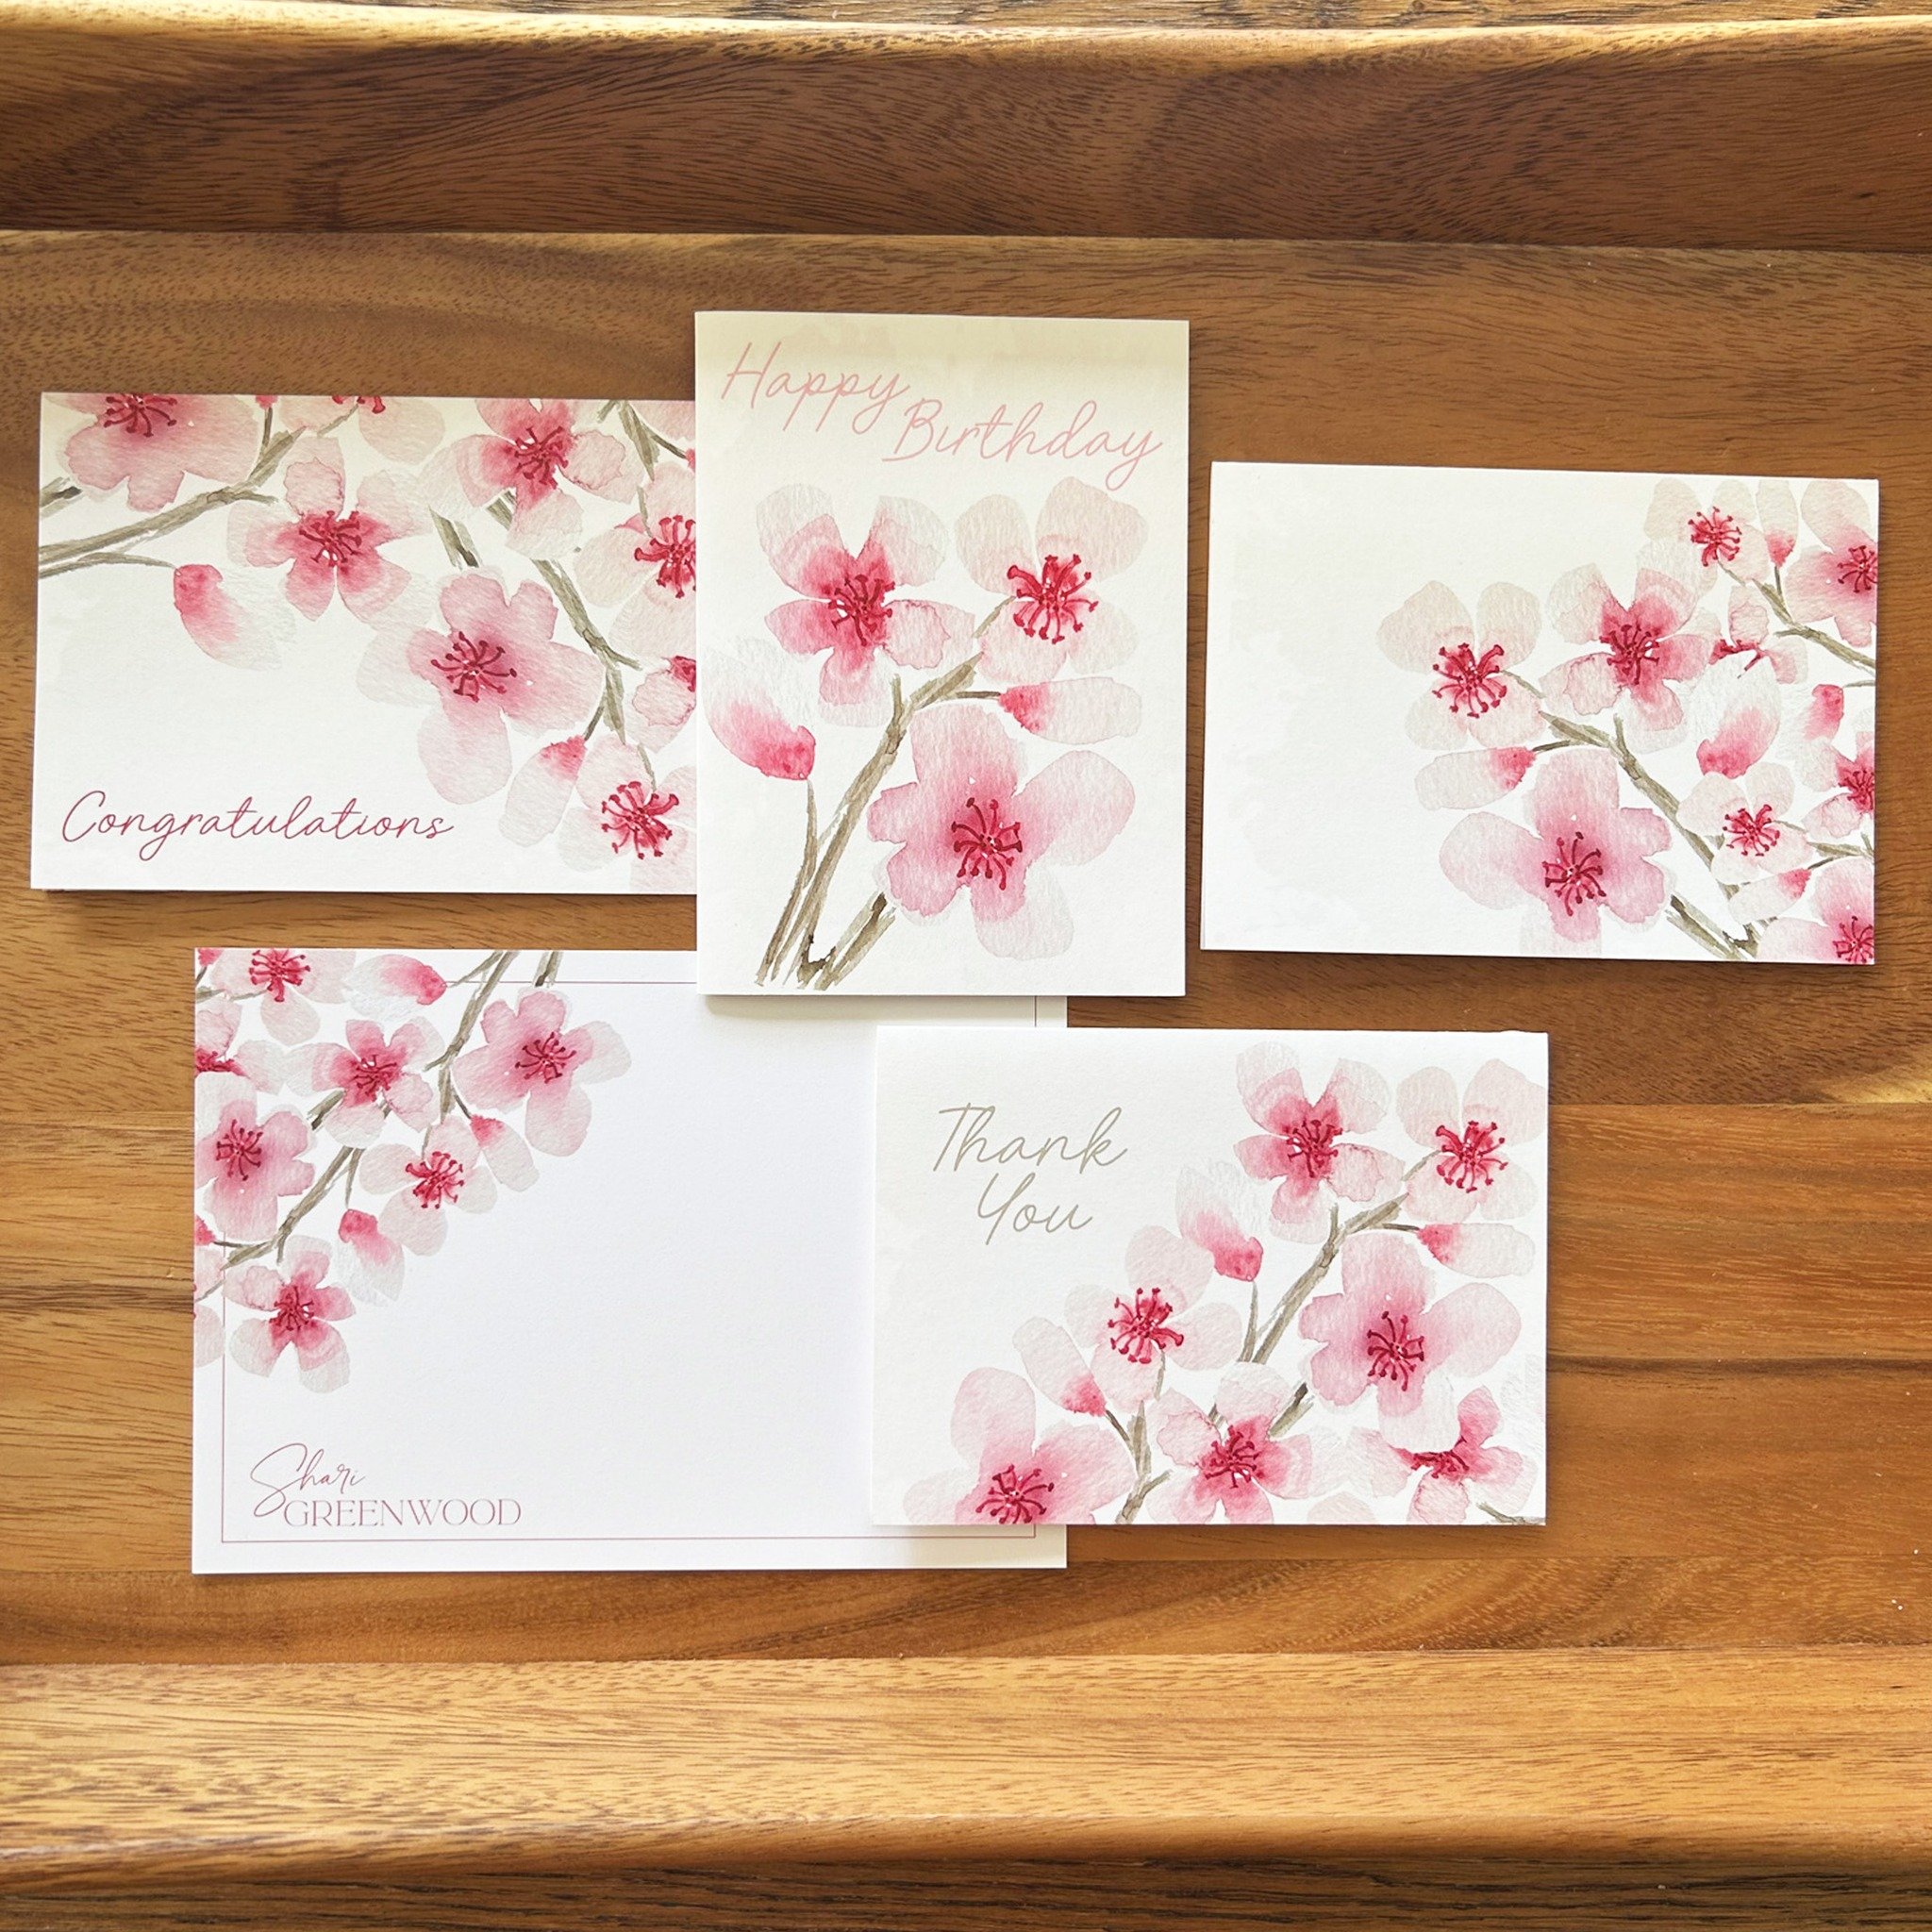 🌸 Who doesn't love a matching set?!

#cherryblossoms #cherryblossomset #stationeryset #watercolorstationery #customstationery #floralstationery #cafenotesandcompany #cafenotesco #watercolorstationery #snailmailart #greetingcards #shopsmall #womanown